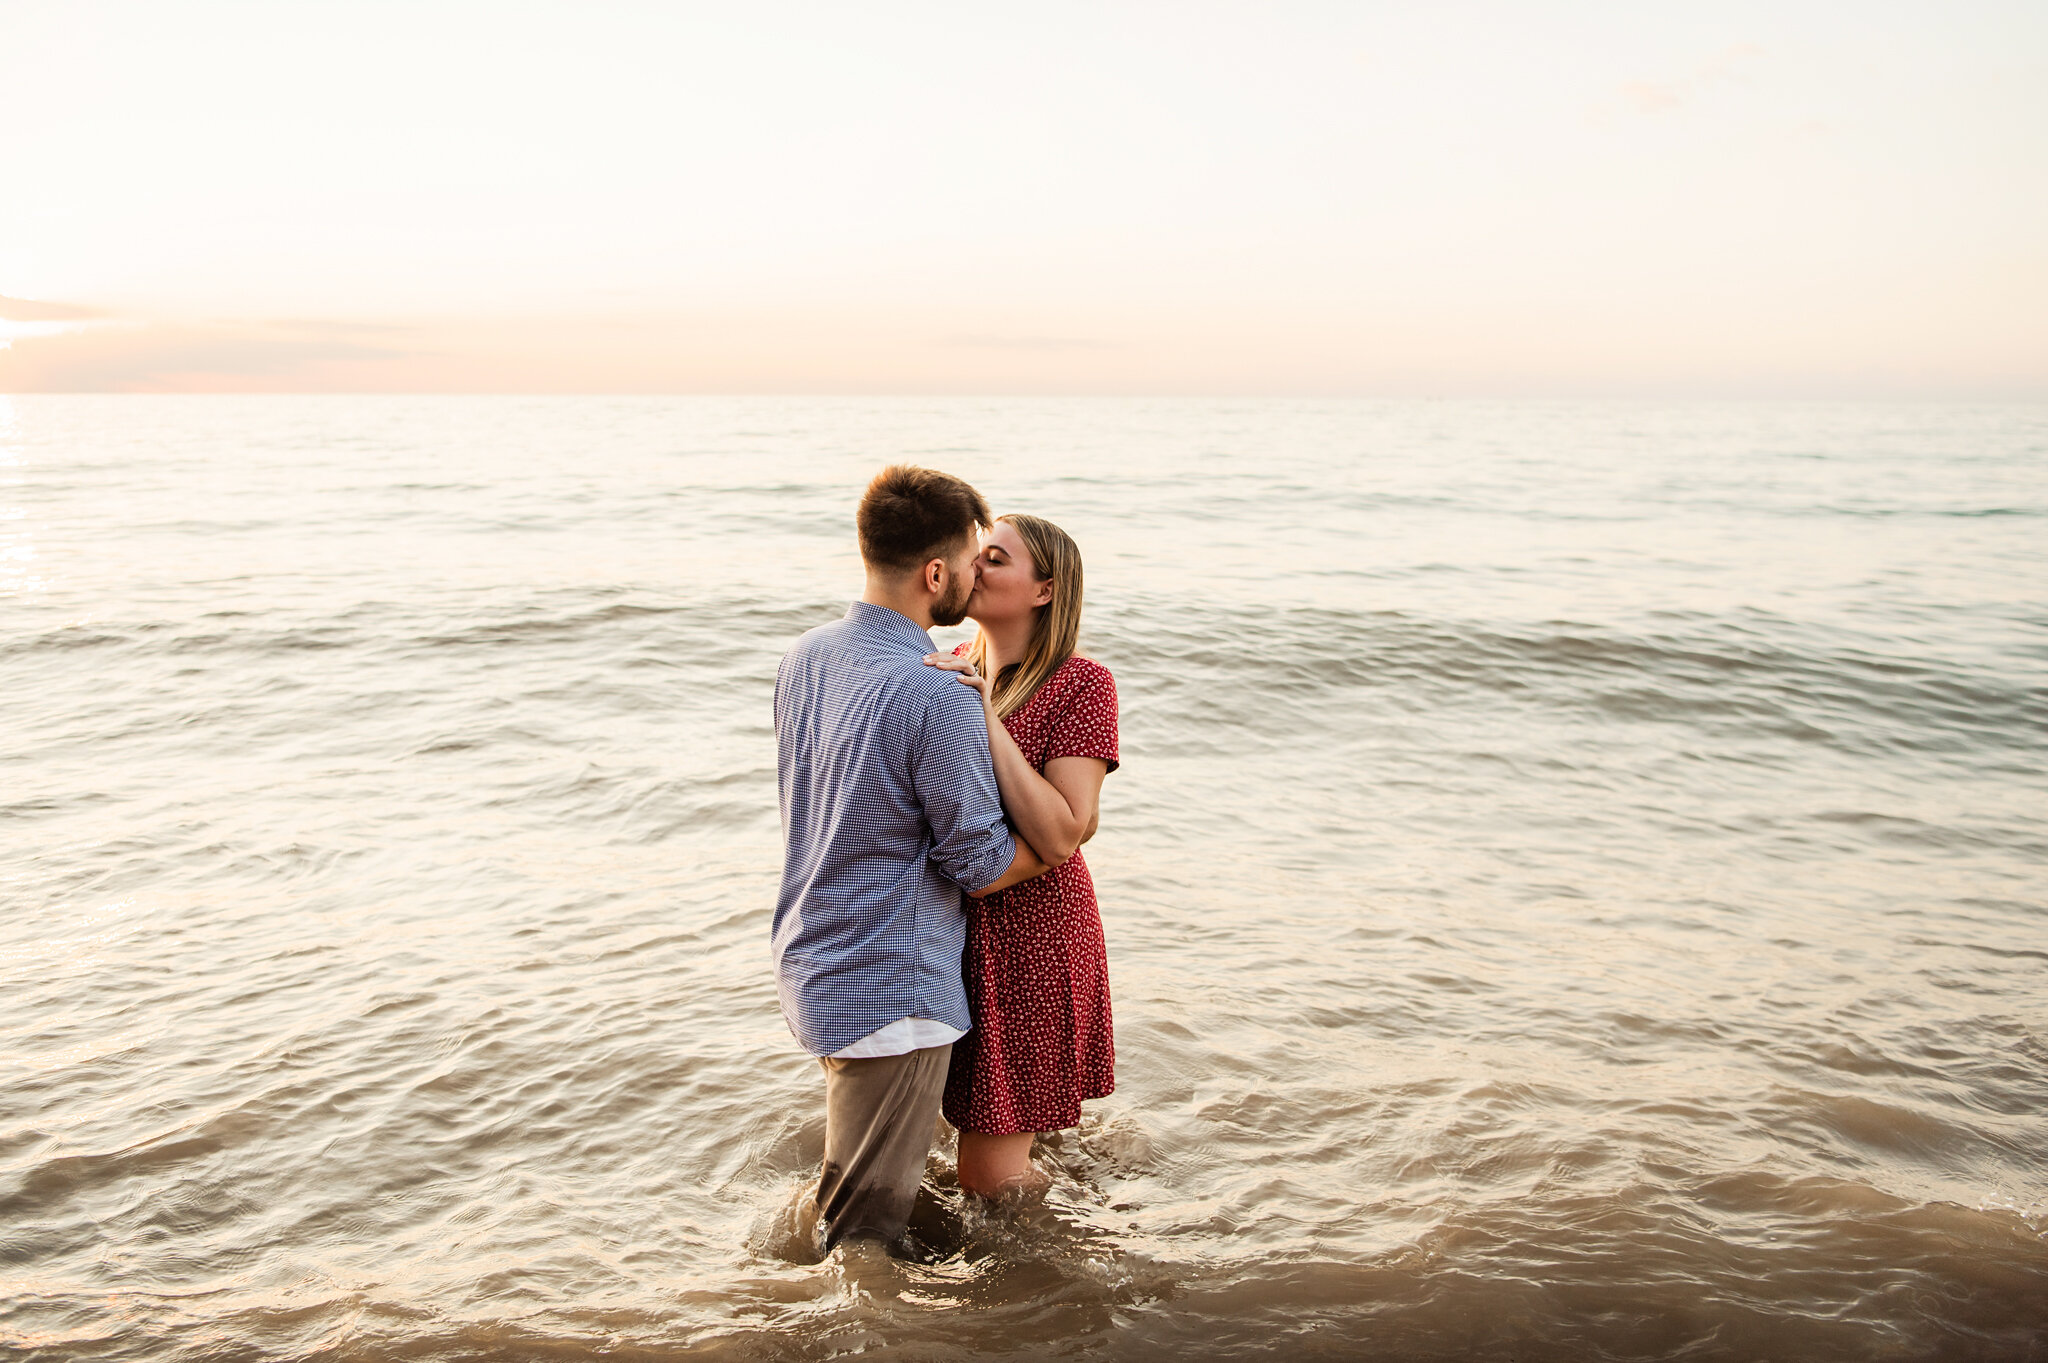 Chimney_Bluffs_State_Park_Rochester_Engagement_Session_JILL_STUDIO_Rochester_NY_Photographer_7231.jpg